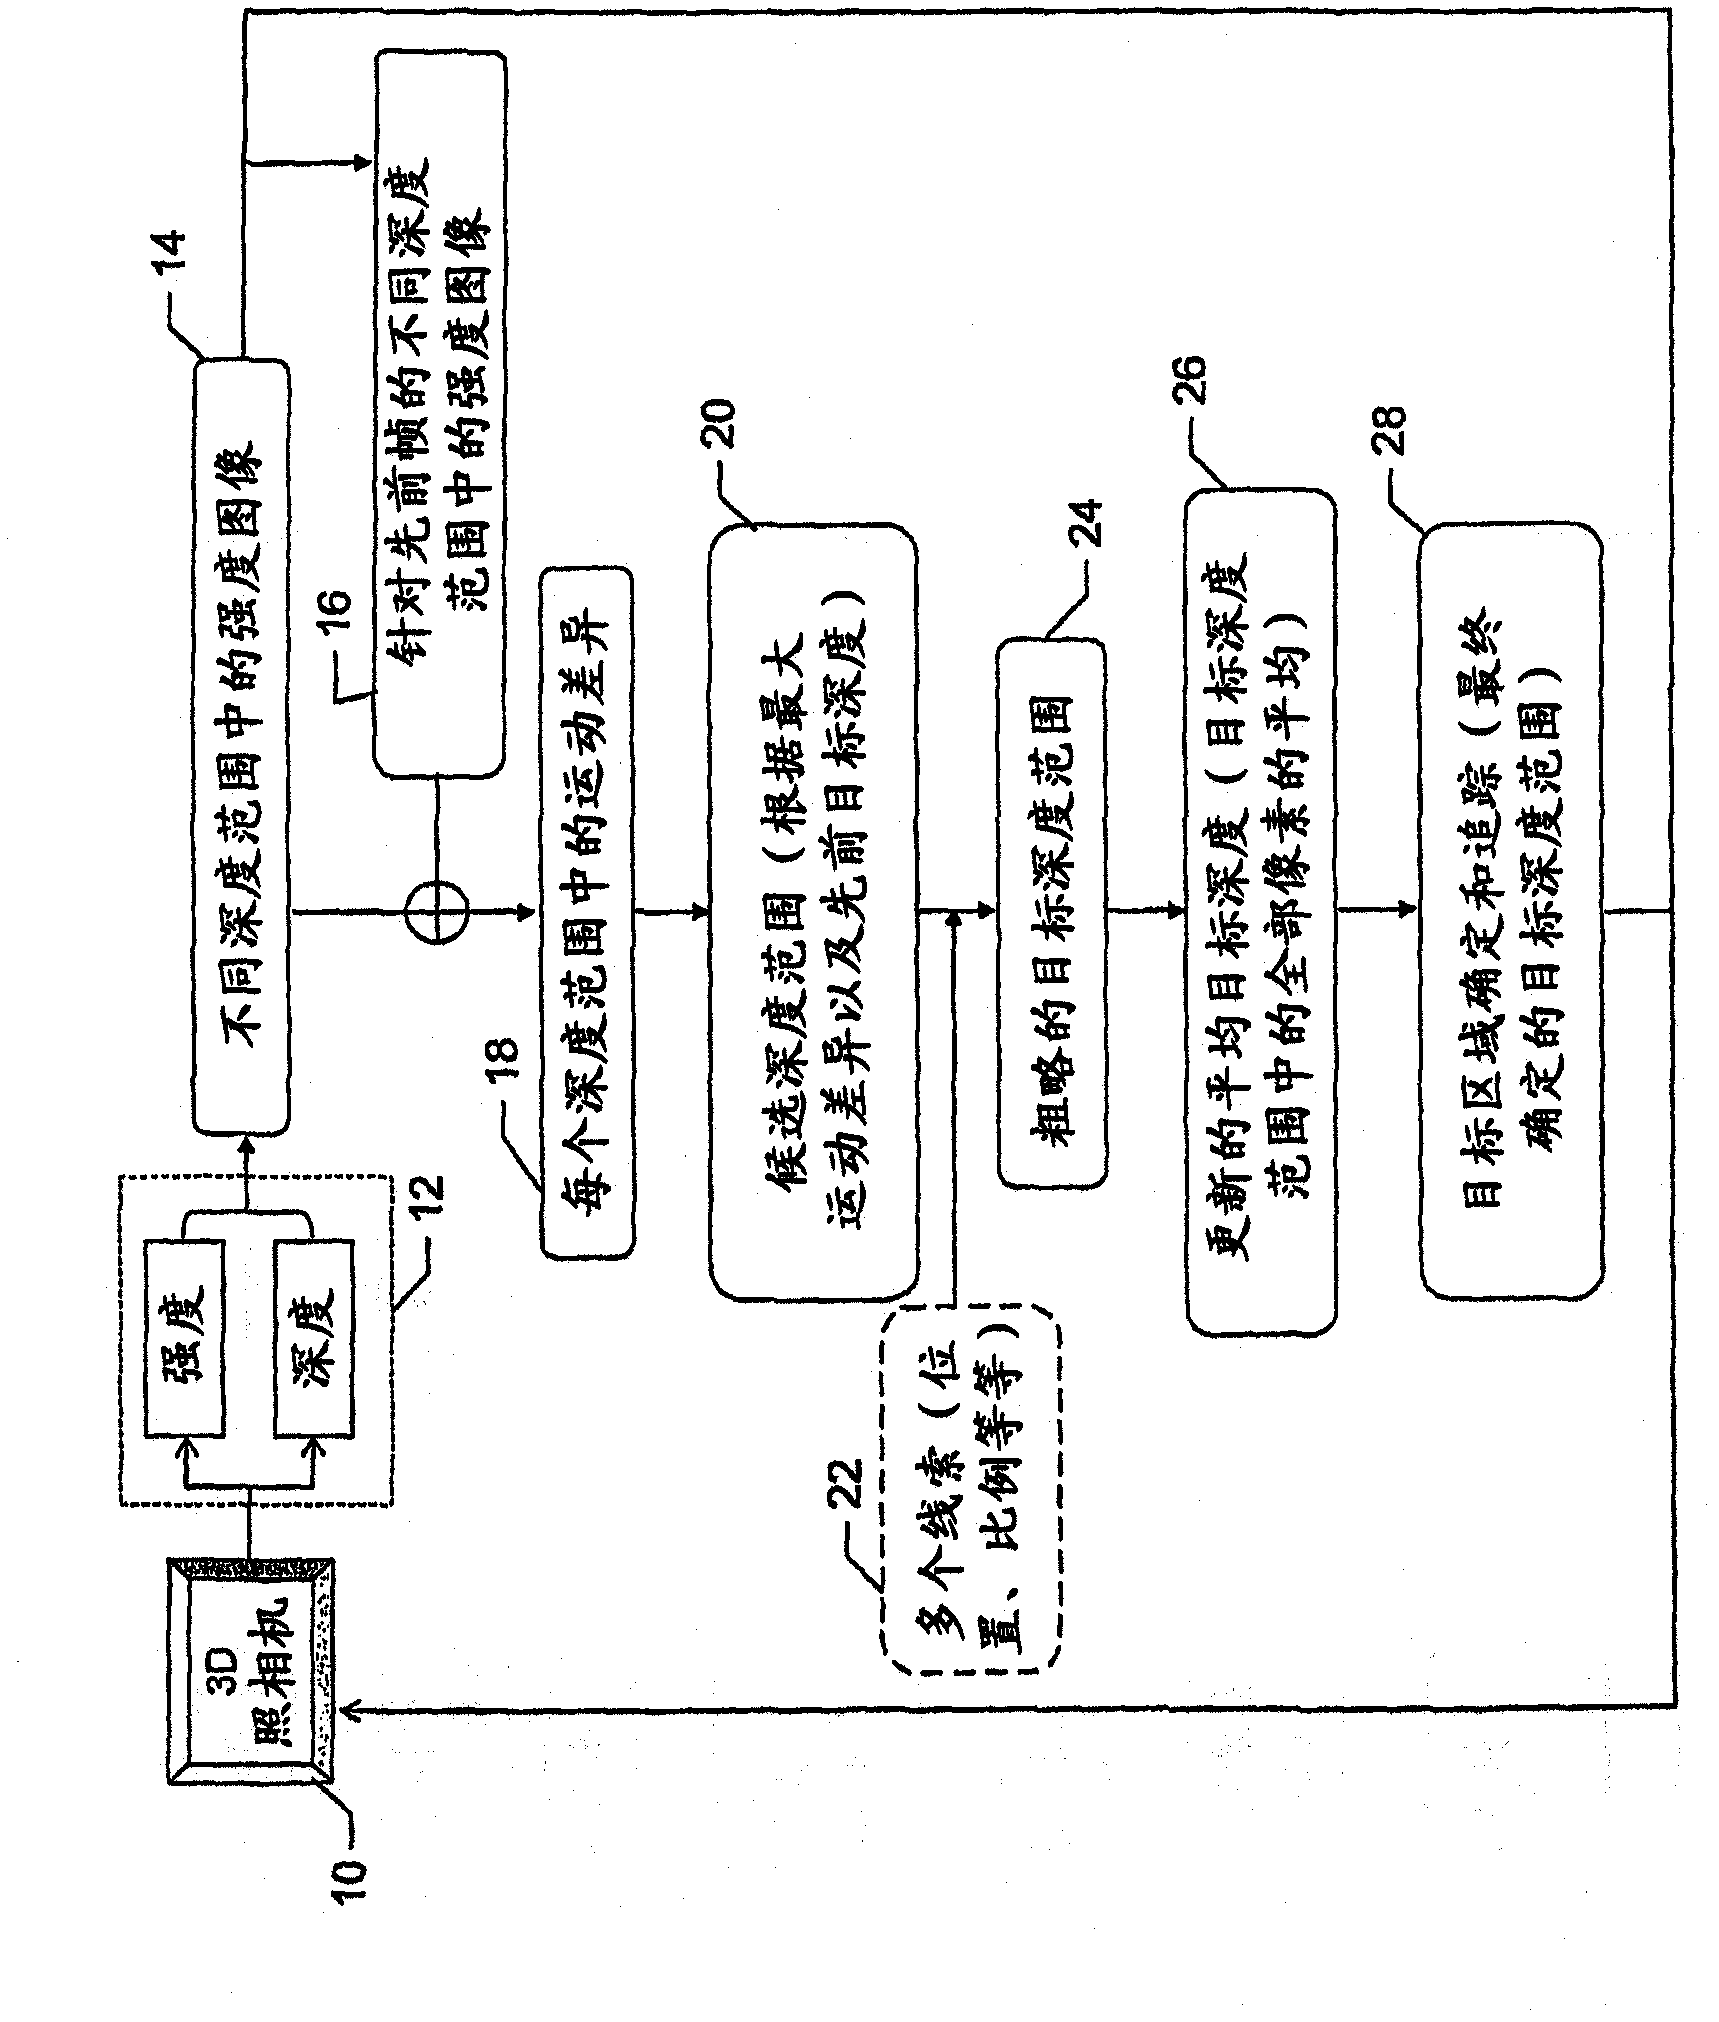 Method, apparatus and computer program product for providing adaptive gesture analysis